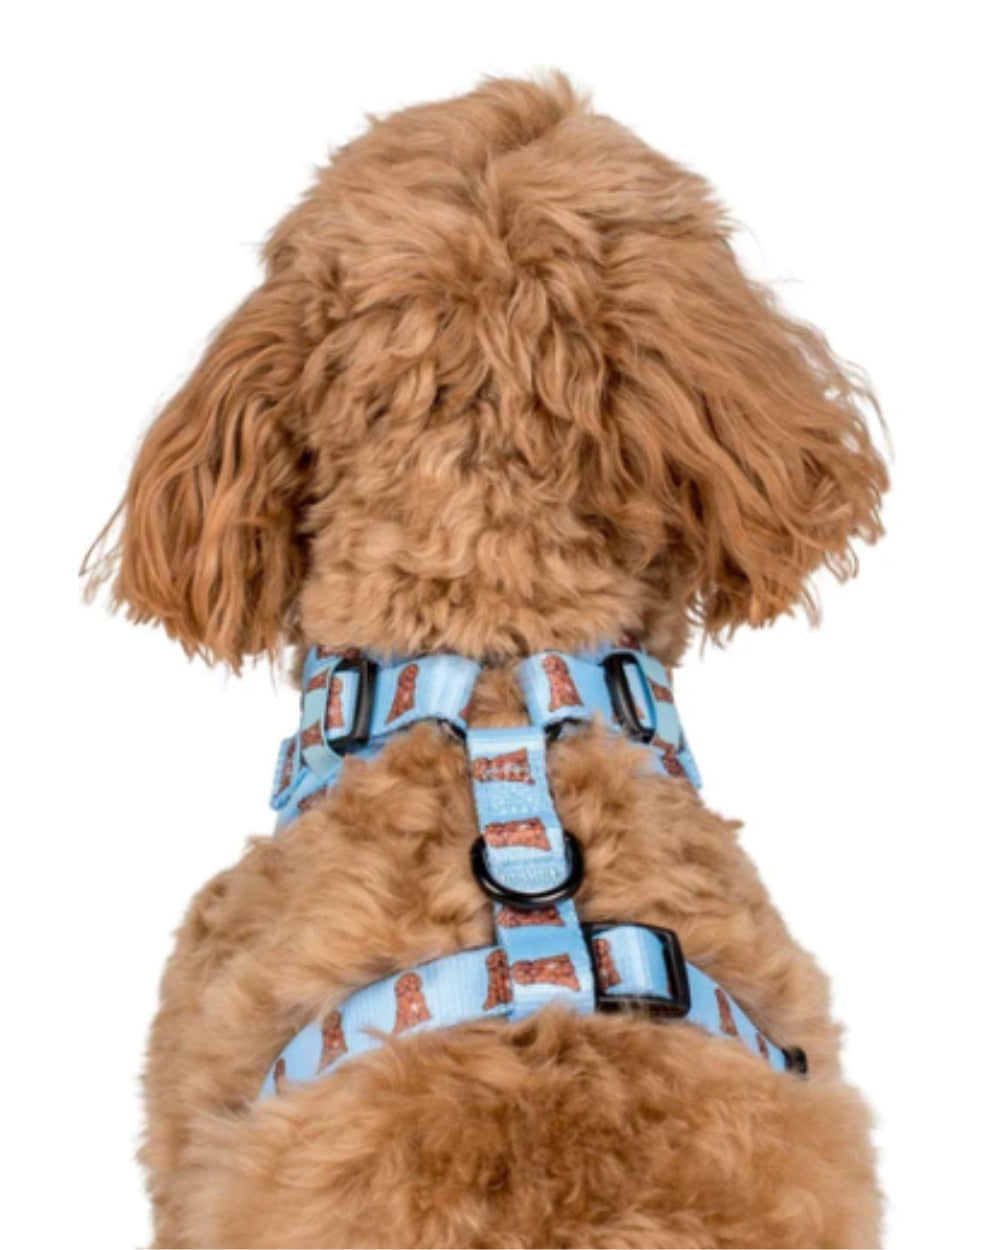 Pablo and Co Golden Retriever Adjustable Dog Harness